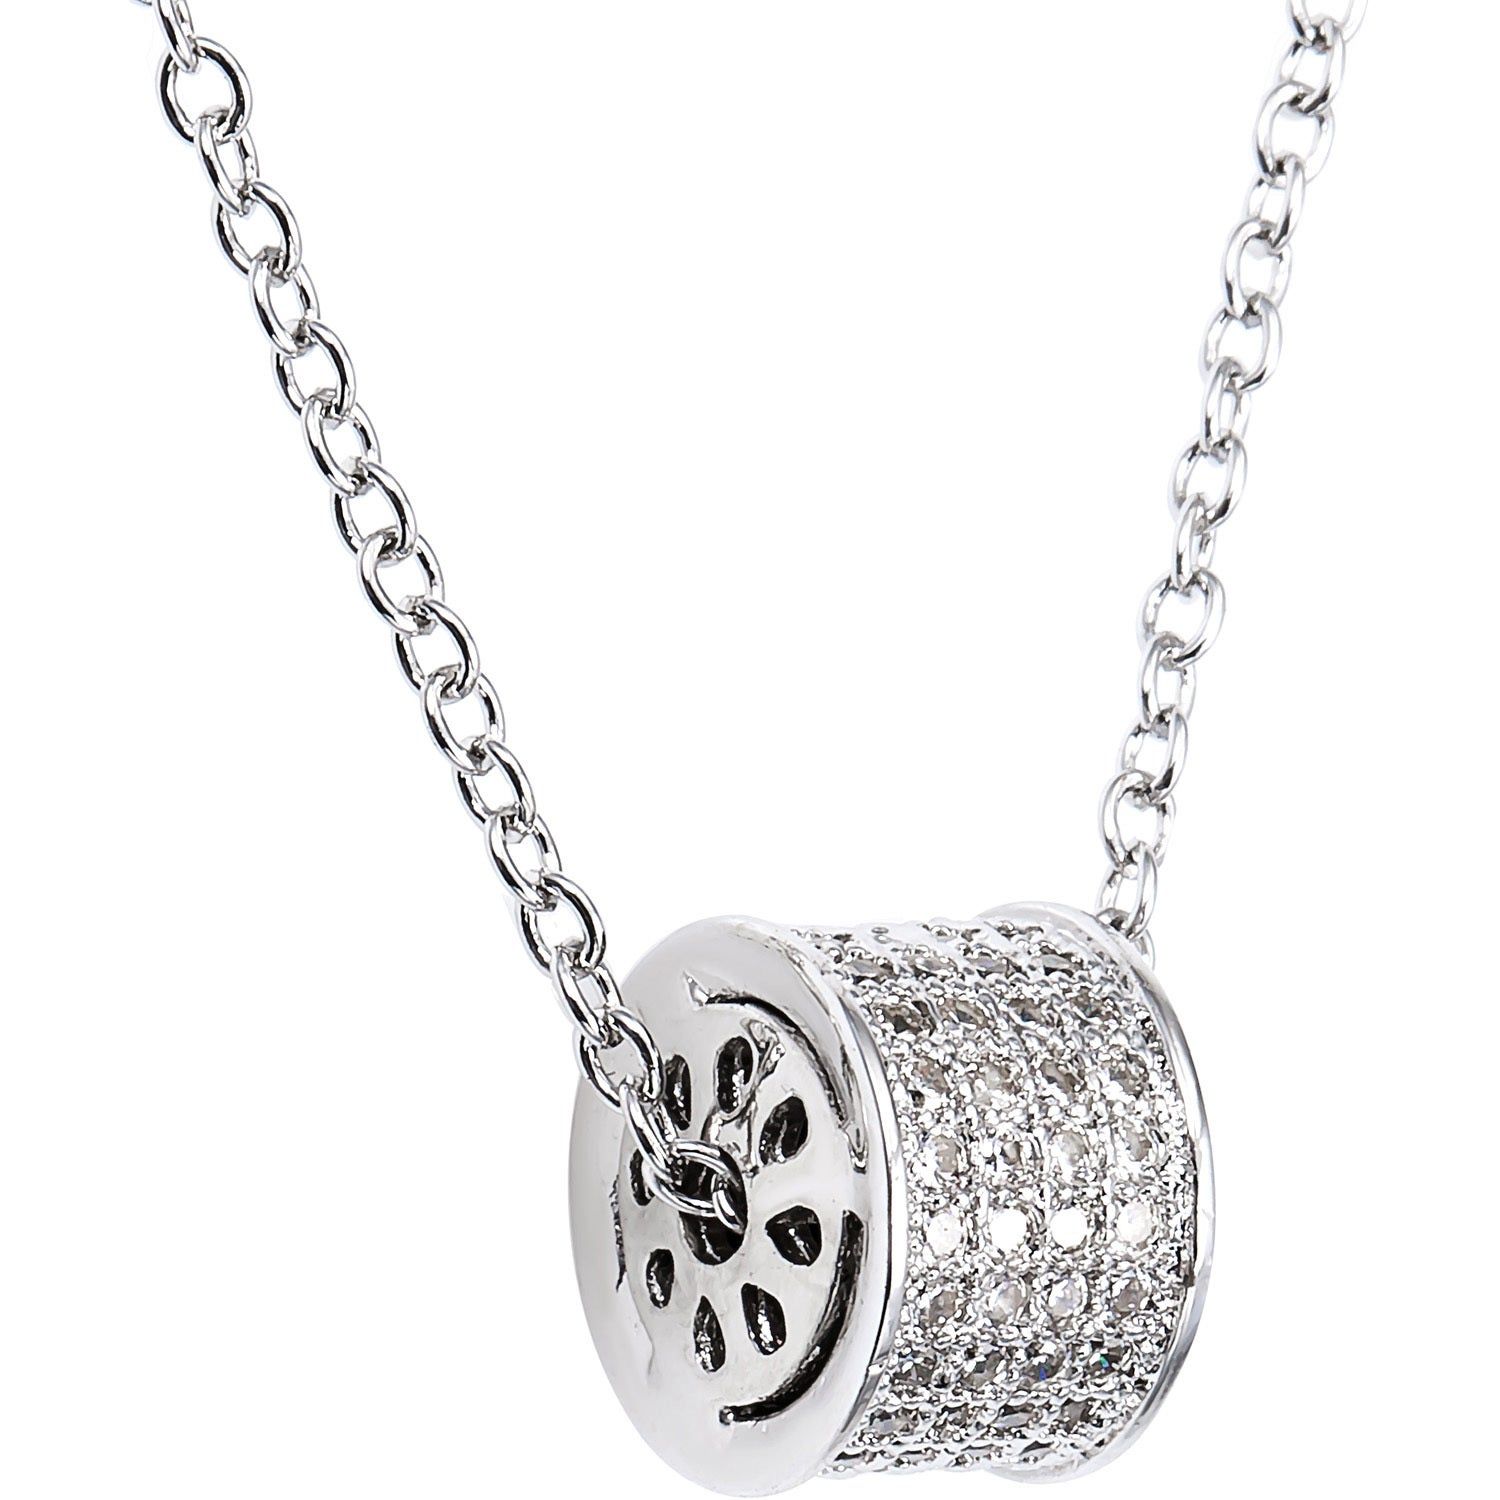 Simon Frank Silver Overlay Pave Infinity Cz Barrel Necklace Inside 2020 Pavé Star Locket Element Necklaces (View 20 of 25)